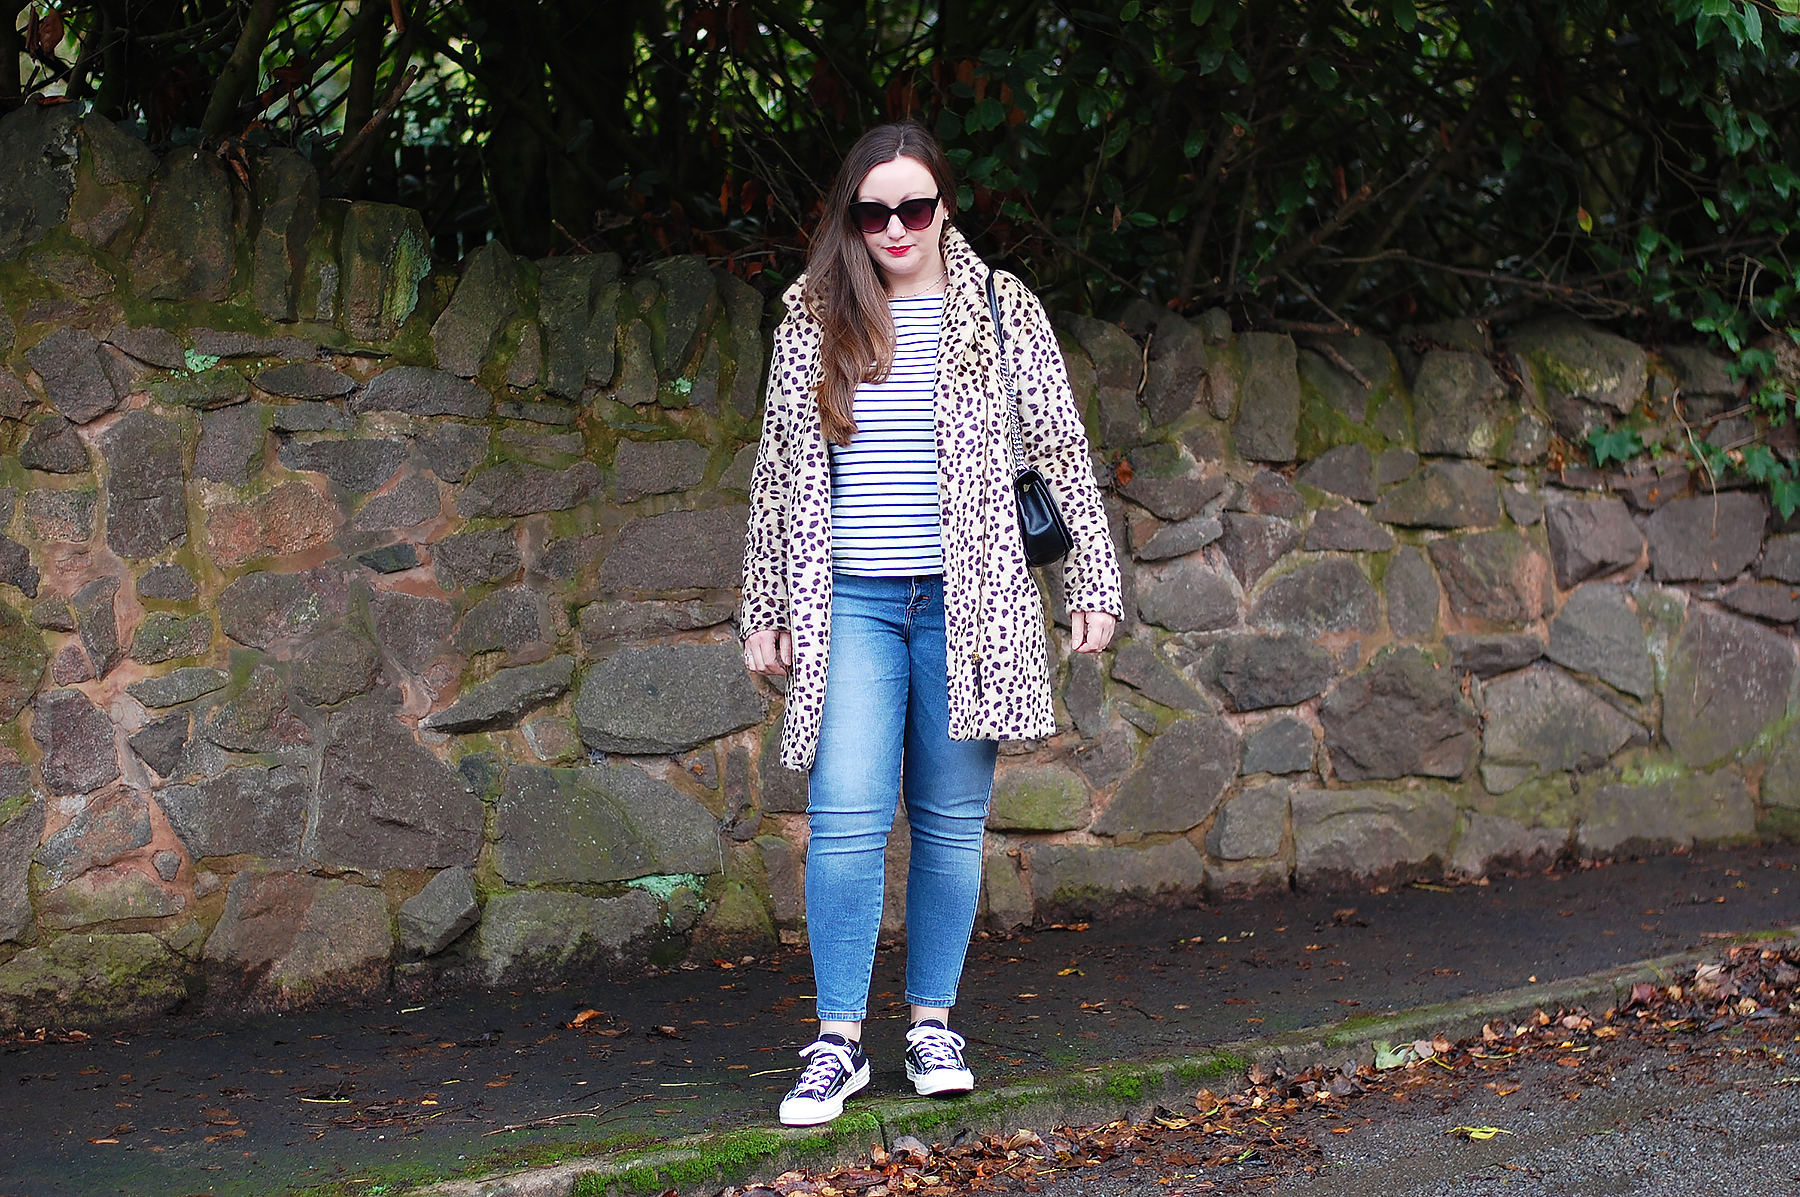 Breton Top And Leopard Print Coat Outfit